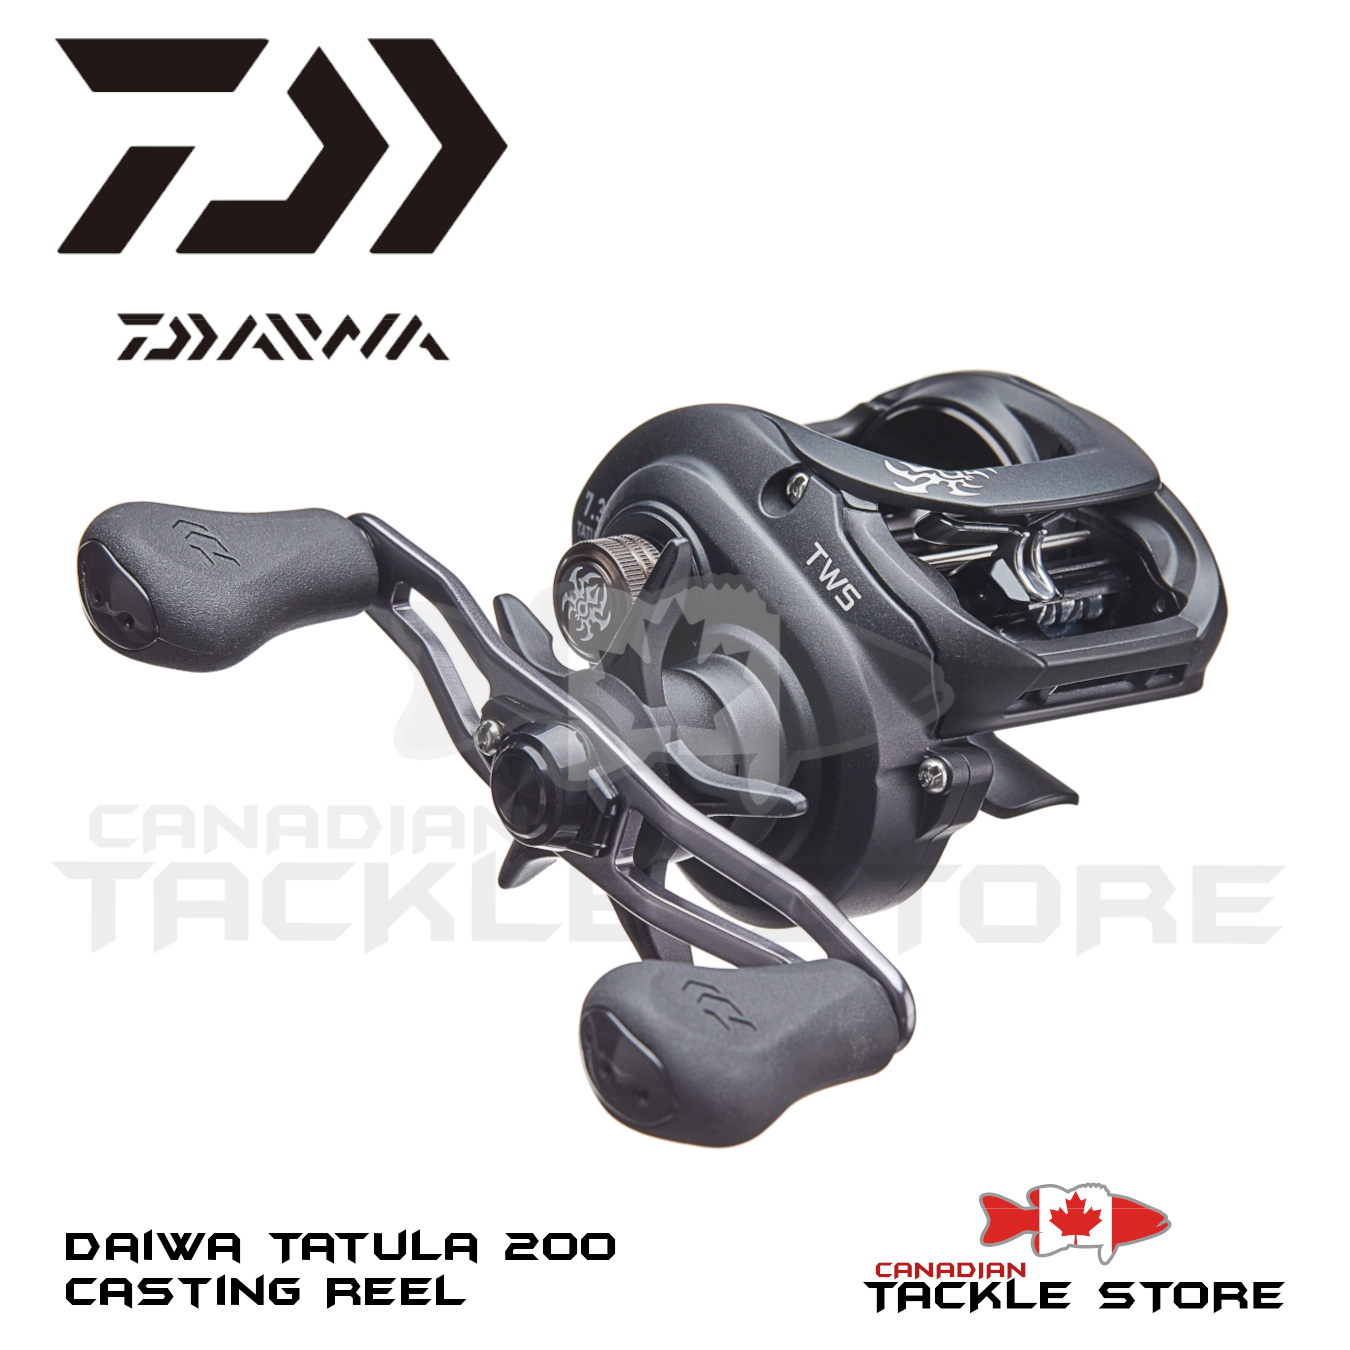  Daiwa Black Widow Baitrunner/Freespool Reels Sizes  3500A/4000A/4500A/5000A Carp Pike Salmon Trout Coarse Match Game Fishing  Spinning (3500A) : Sports & Outdoors